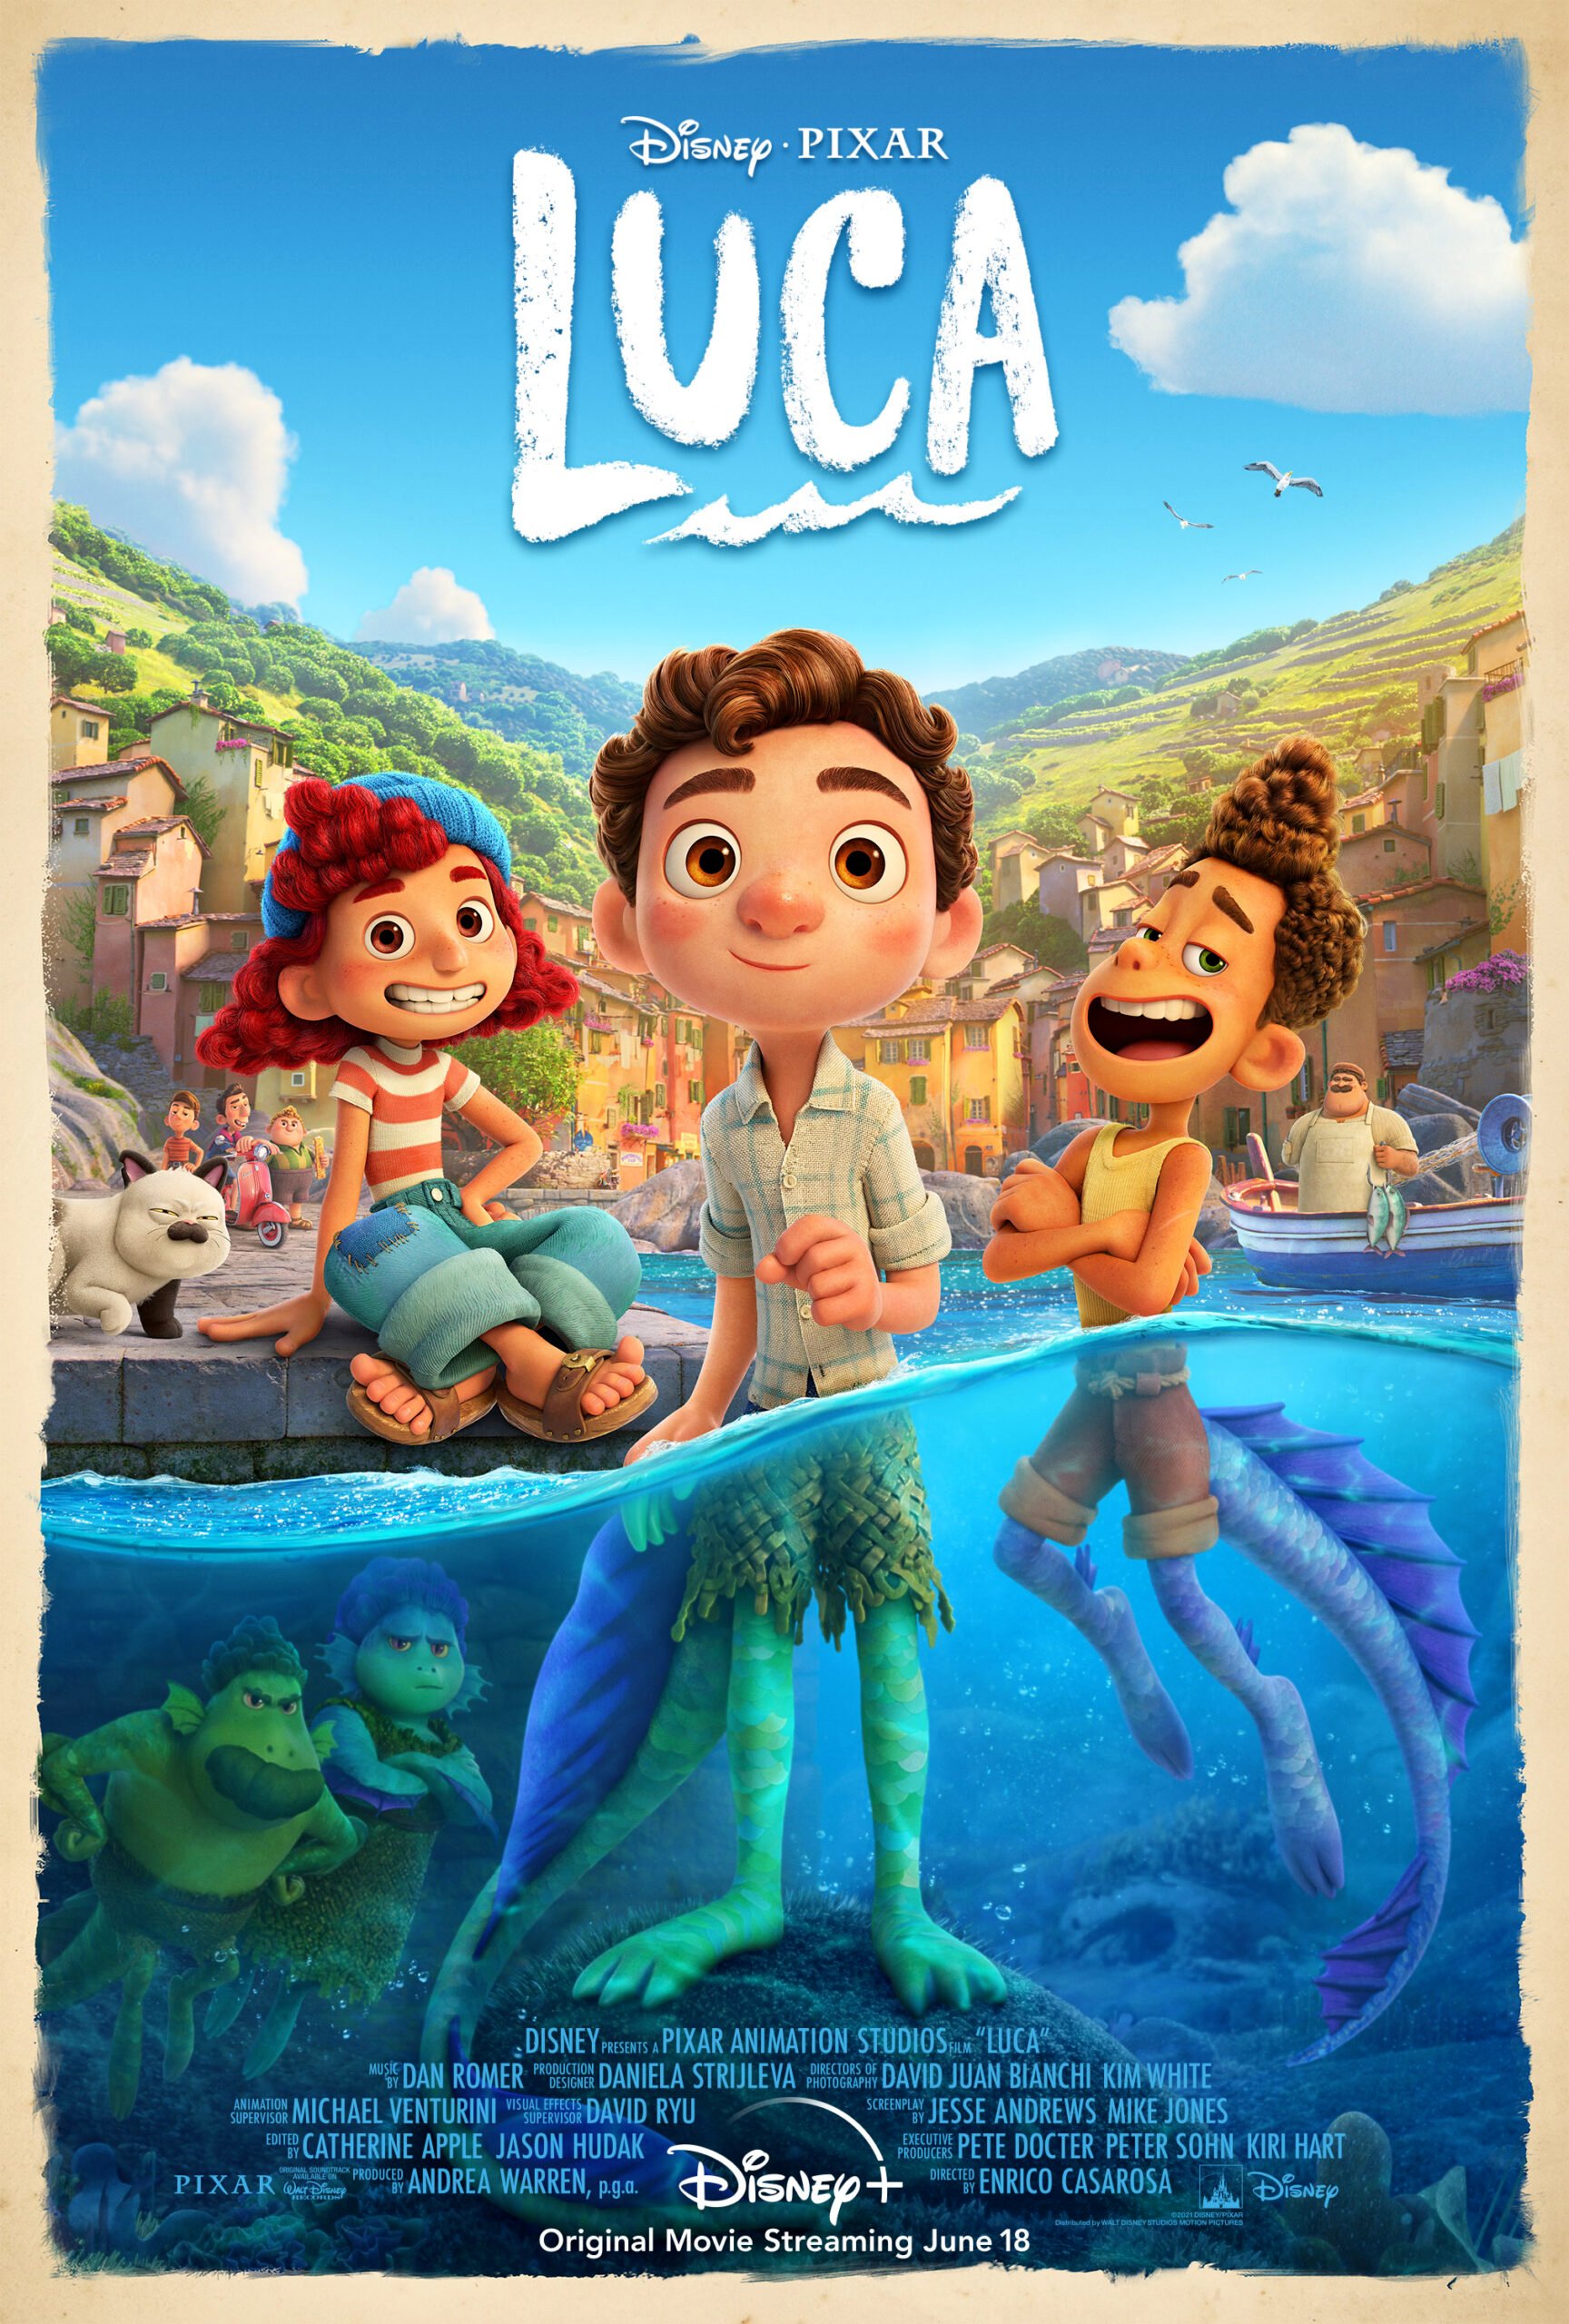 Love Pixar Movies? This is what we know so far about Luca (and the latest Luca Pixar Trailer)......